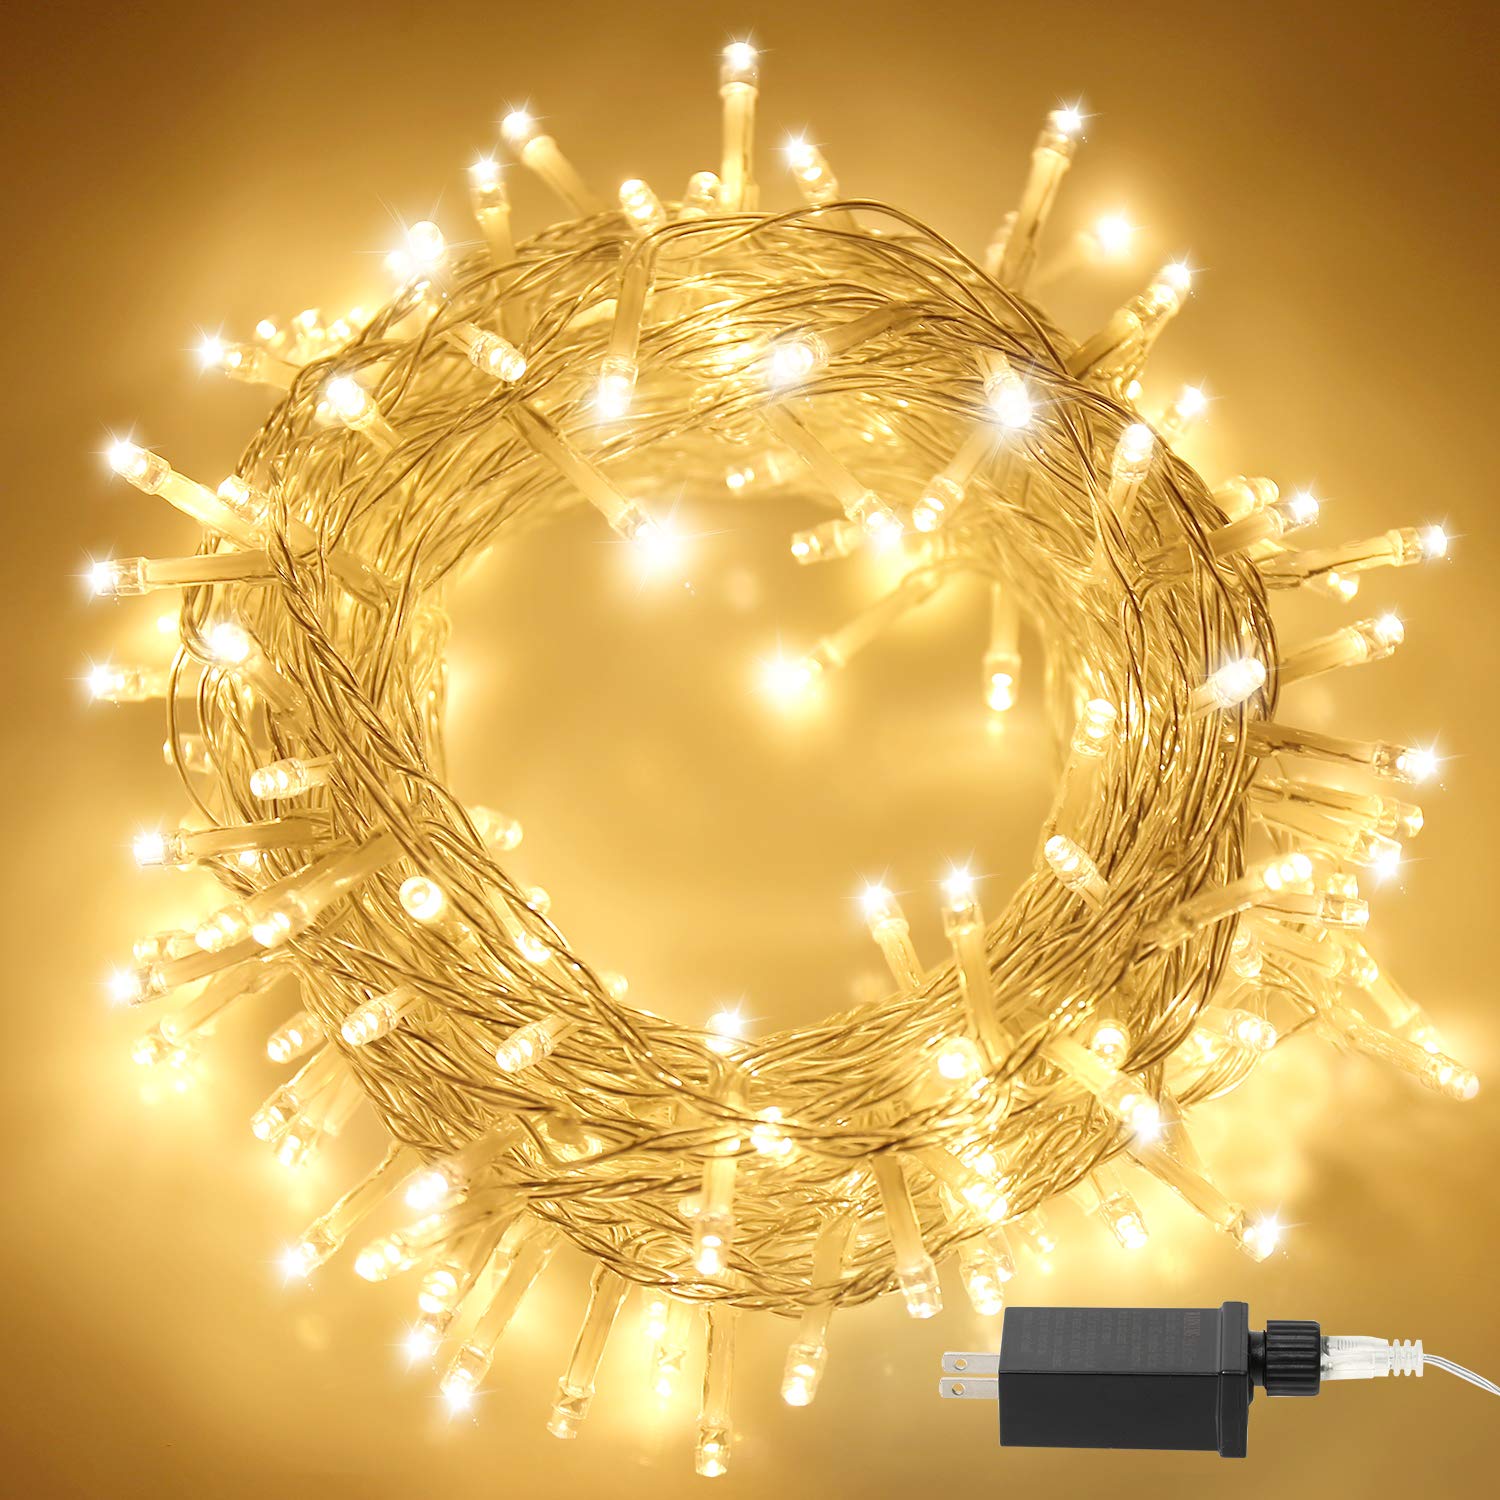 The One And Only Glimmer Spider String Lights 10 Feet 7 In 1 Light Functions 